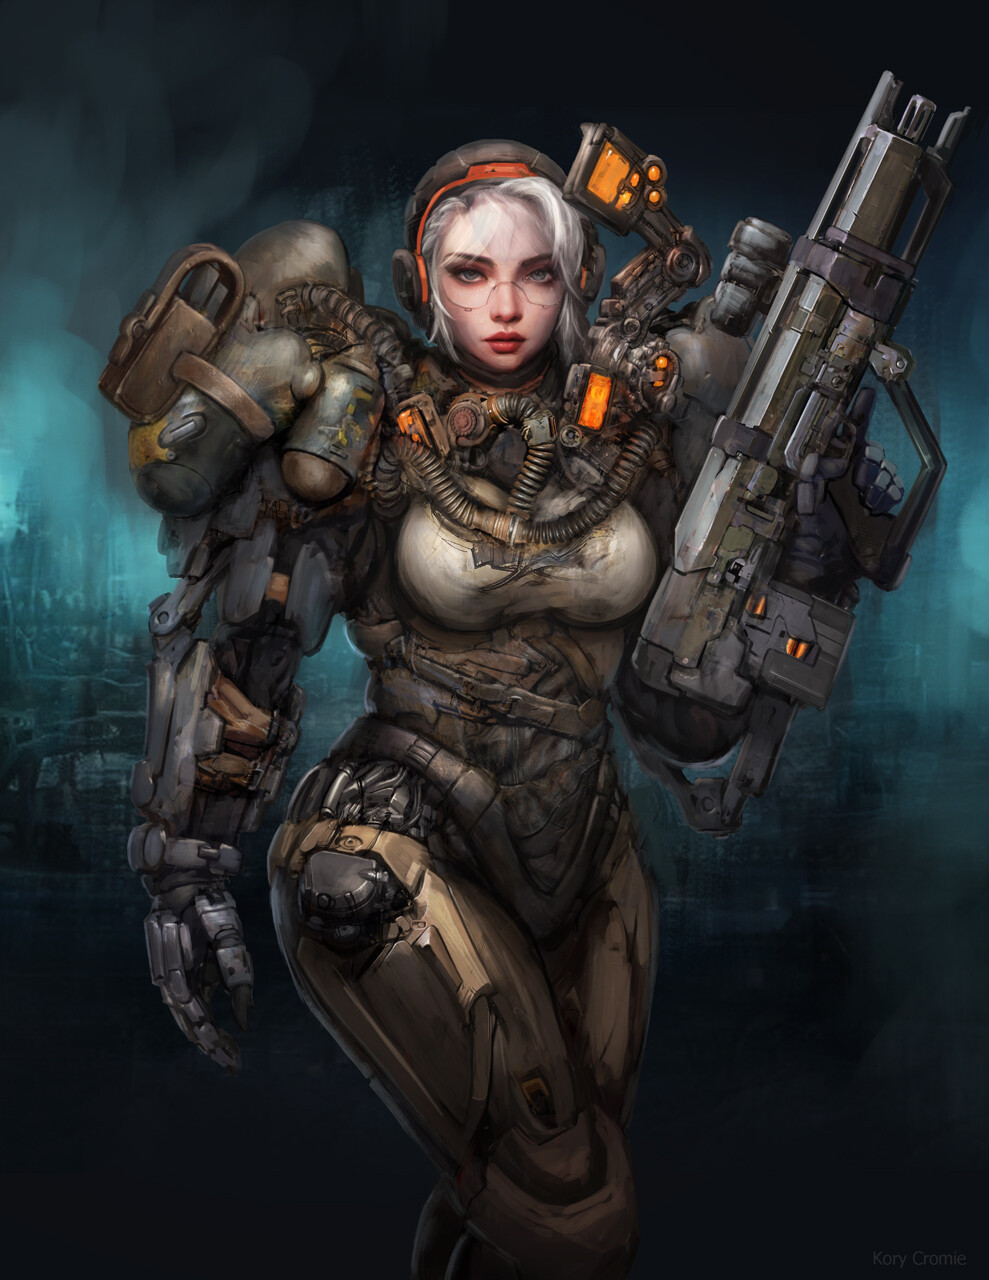 Kory Cromie Science Fiction Science Fiction Women Women Armored Girls With Guns Weapon Artwork 989x1280